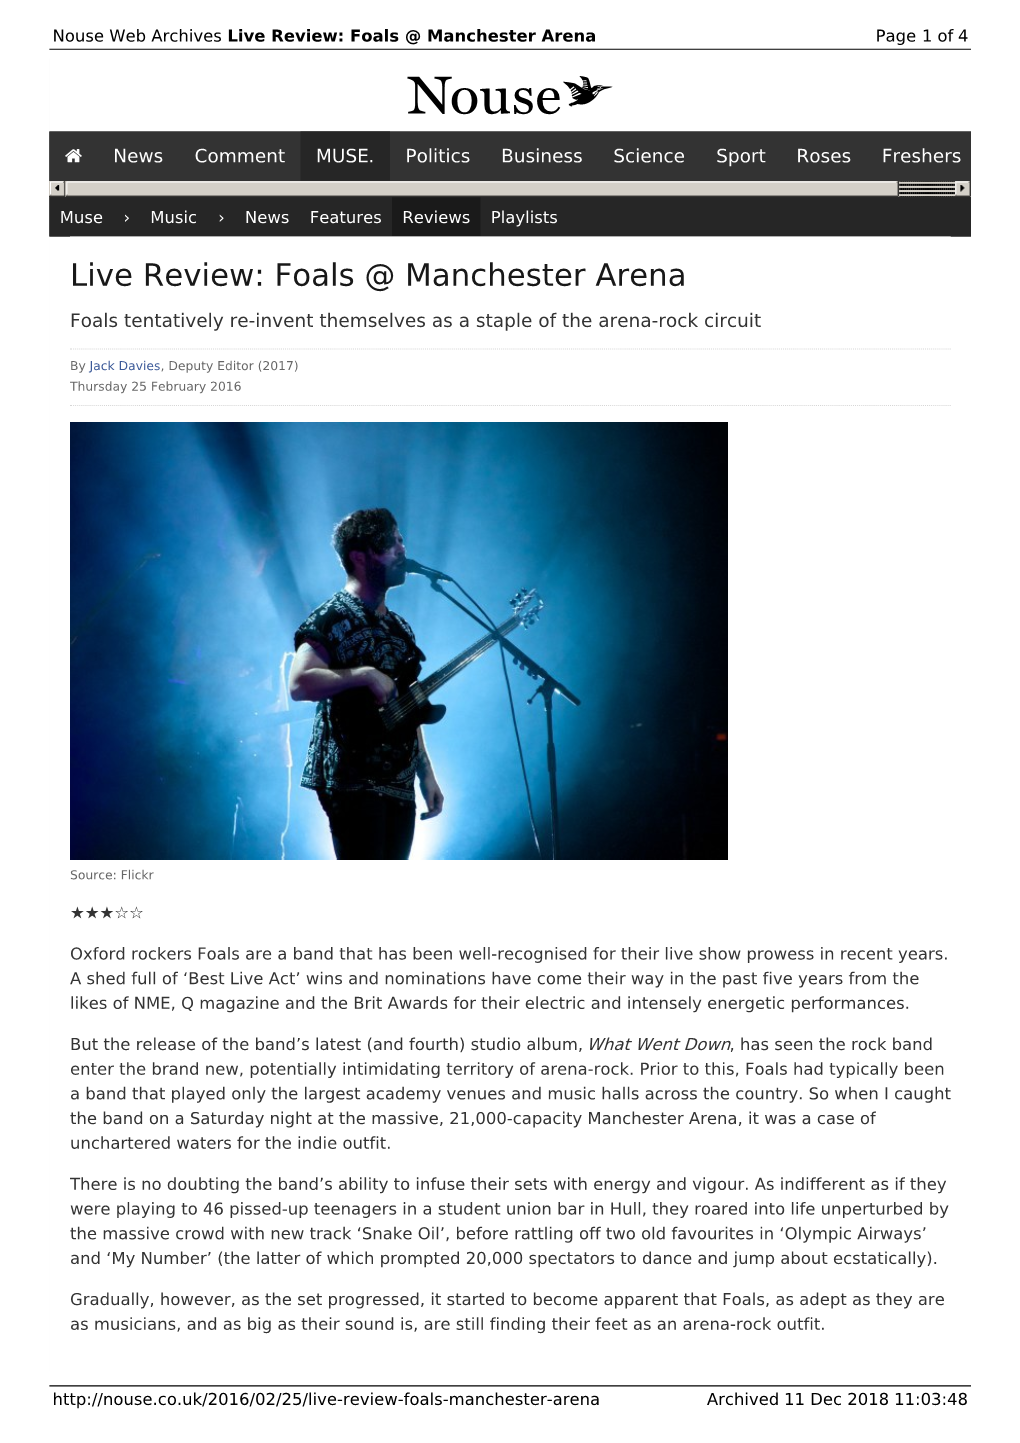 Live Review: Foals @ Manchester Arena | Nouse